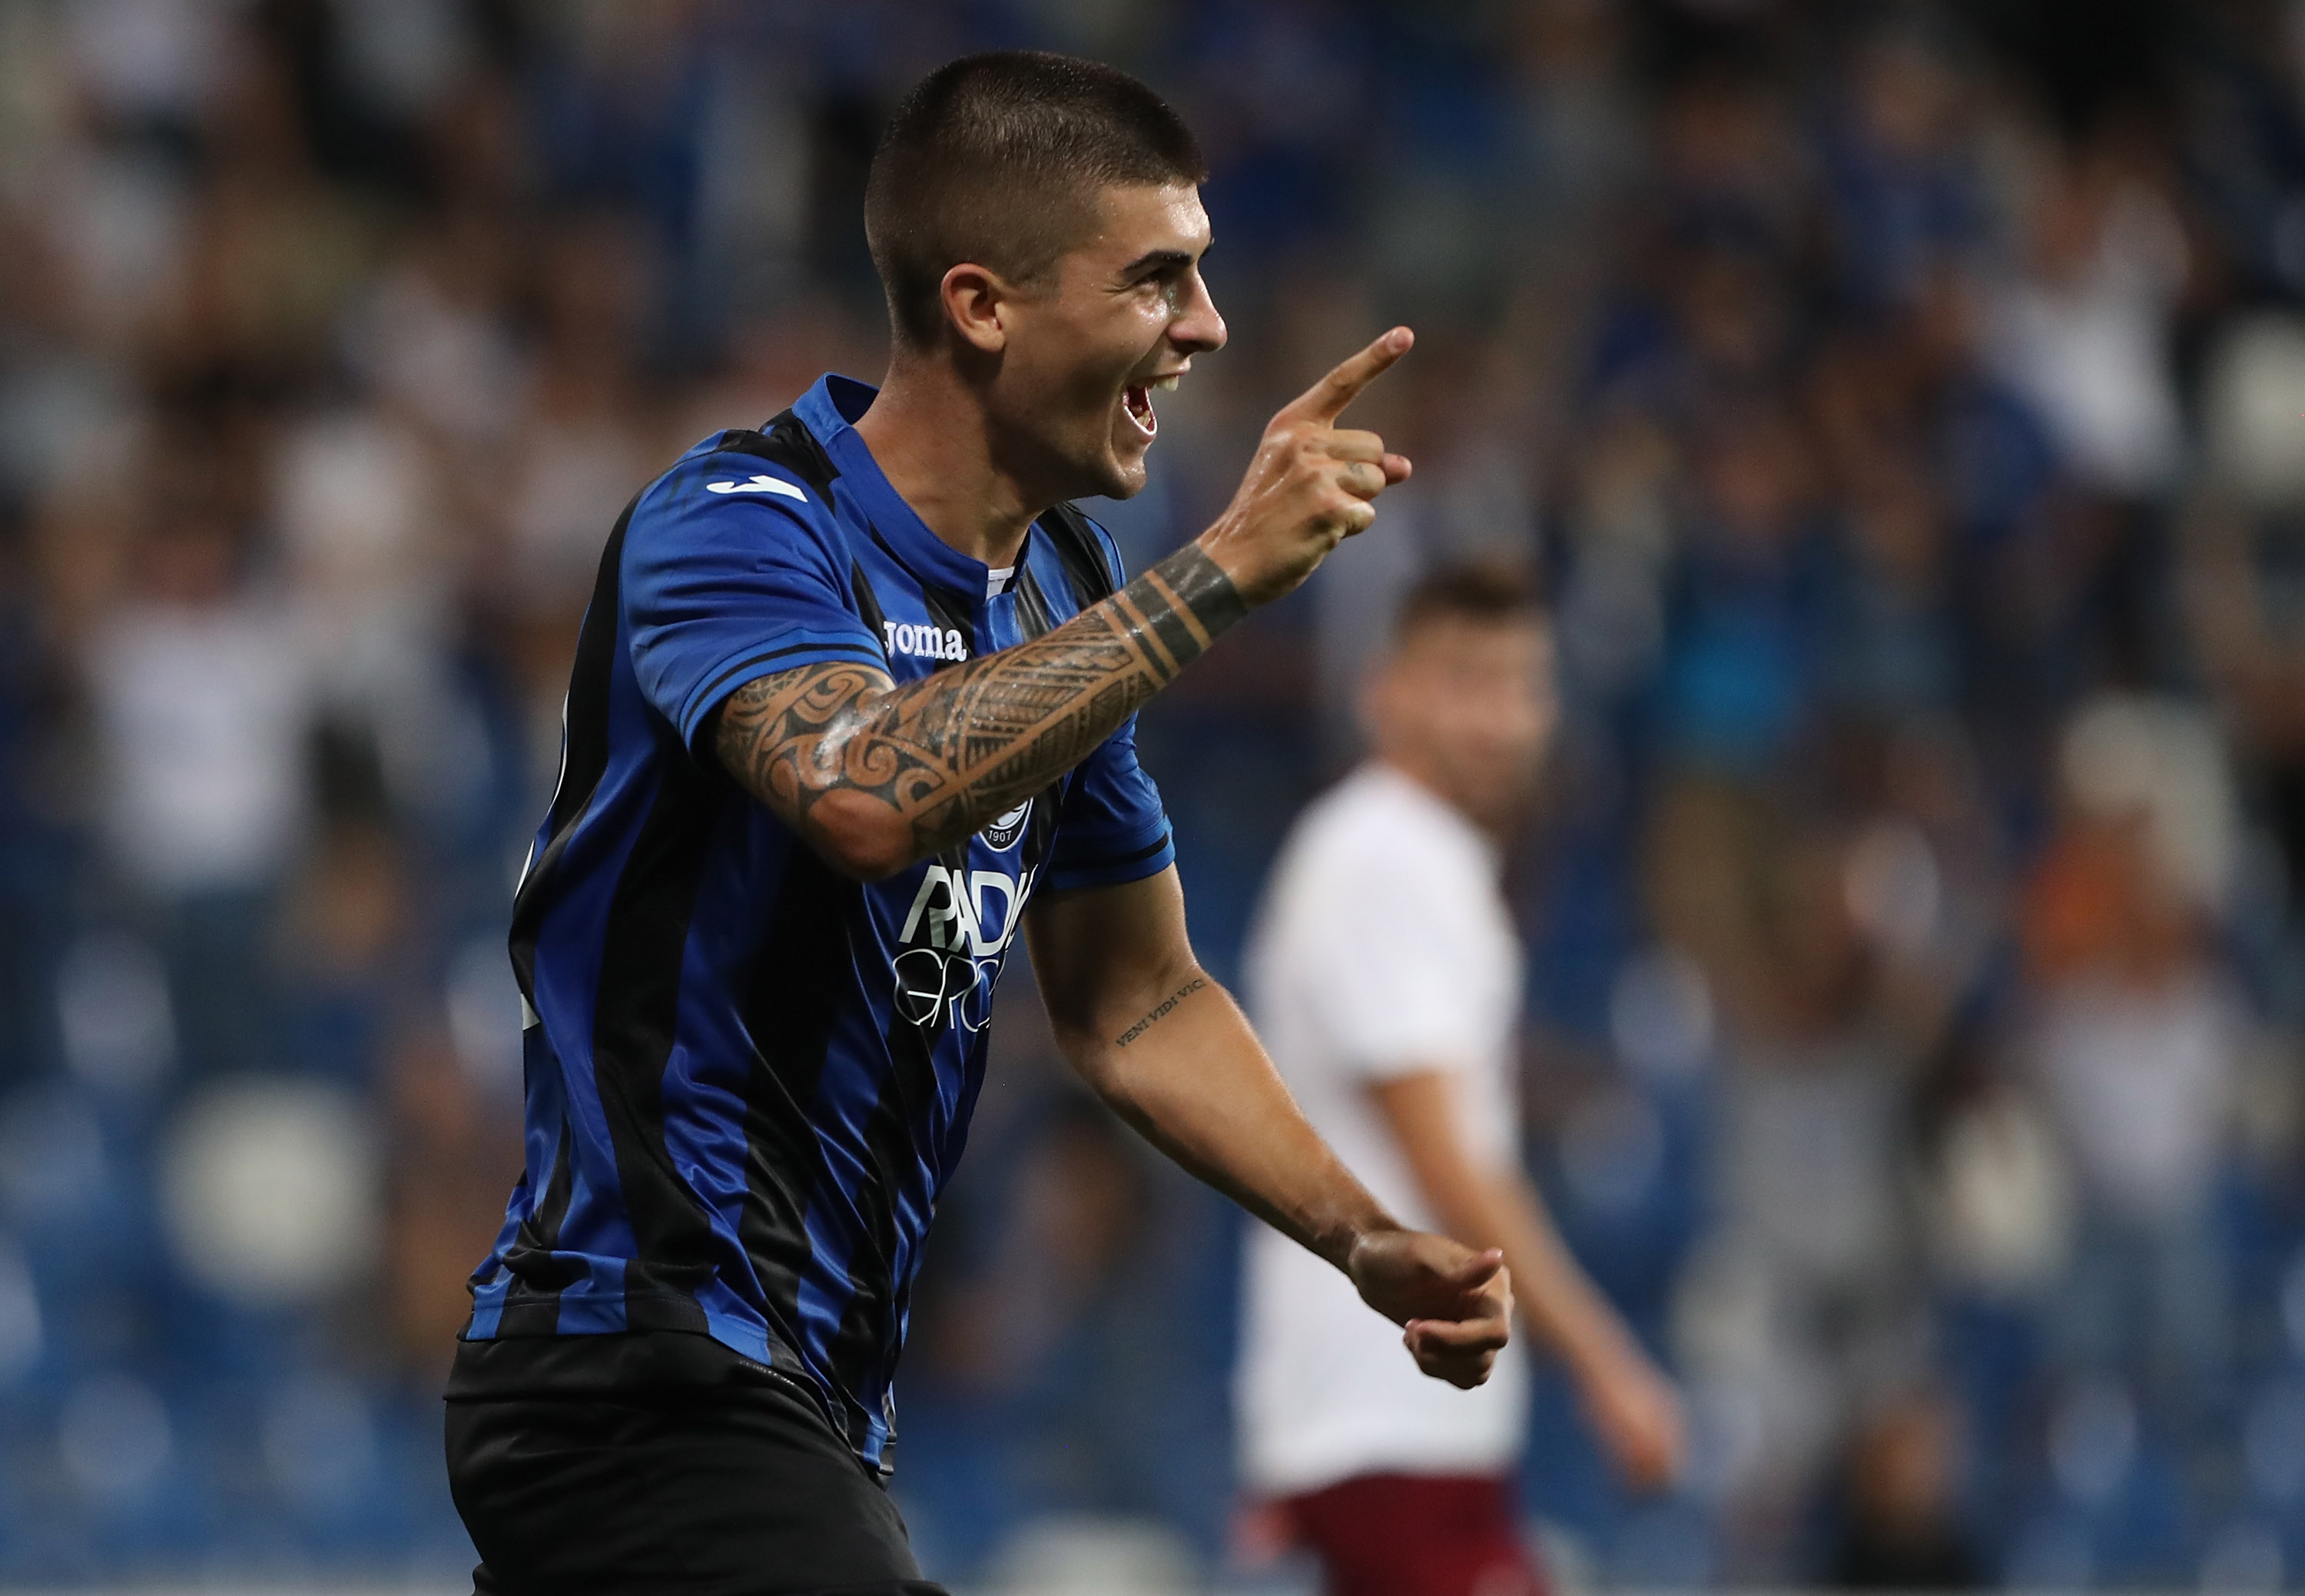 REGGIO NELL'EMILIA, ITALY - JULY 26:  Gianluca Mancini of Atalanta BC celebrates after scoring the second goal of his team during the Europa League Second Qualifying Round match between Atalanta BC and FK Sarajevo at Mapei Stadium - Citta' del Tricolore on July 26, 2018 in Reggio nell'Emilia, Italy.  (Photo by Marco Luzzani/Getty Images)